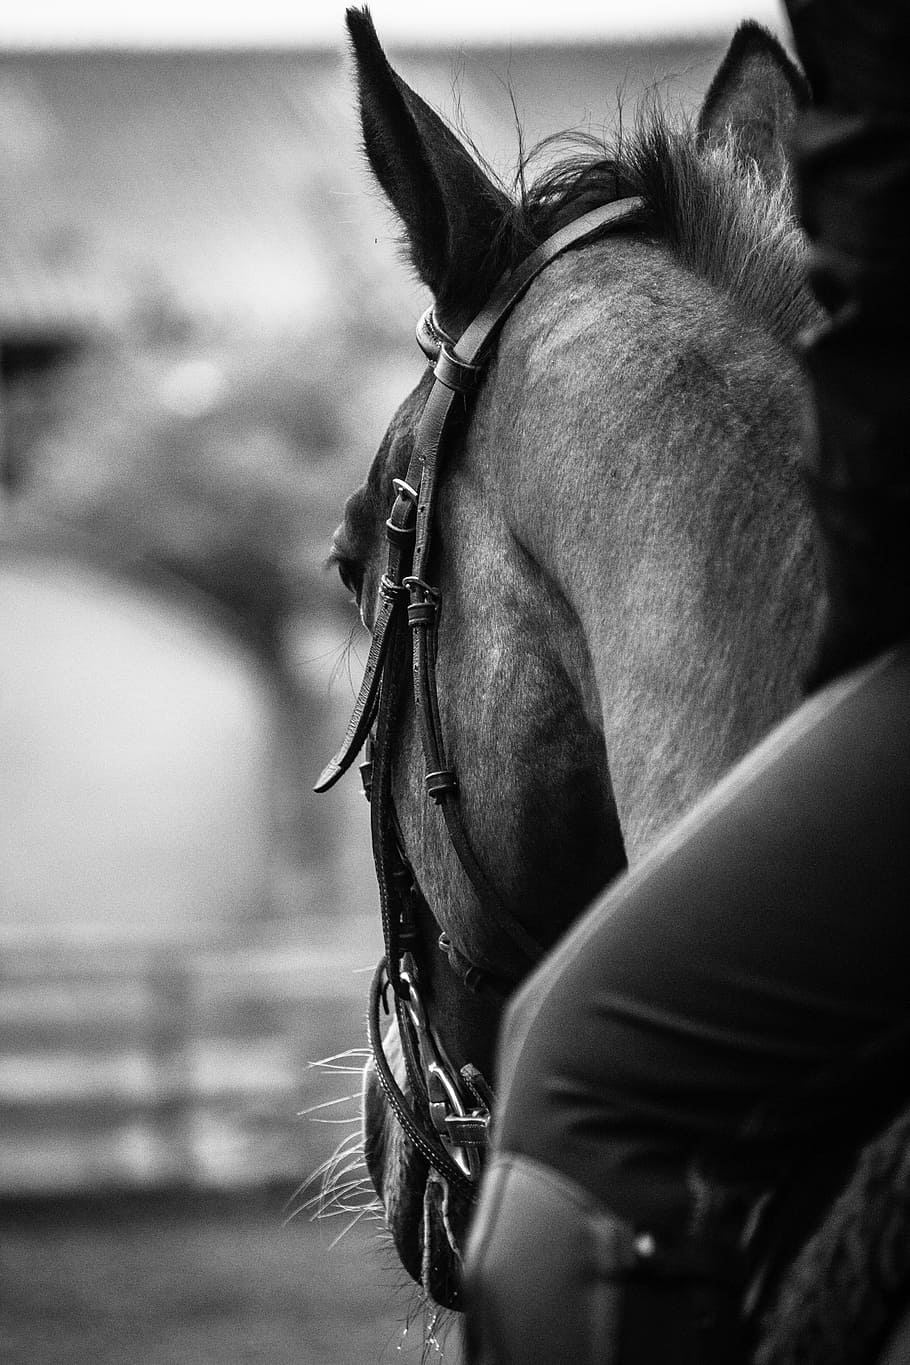 HD wallpaper: grayscale photography of horse, head, black and white, riding